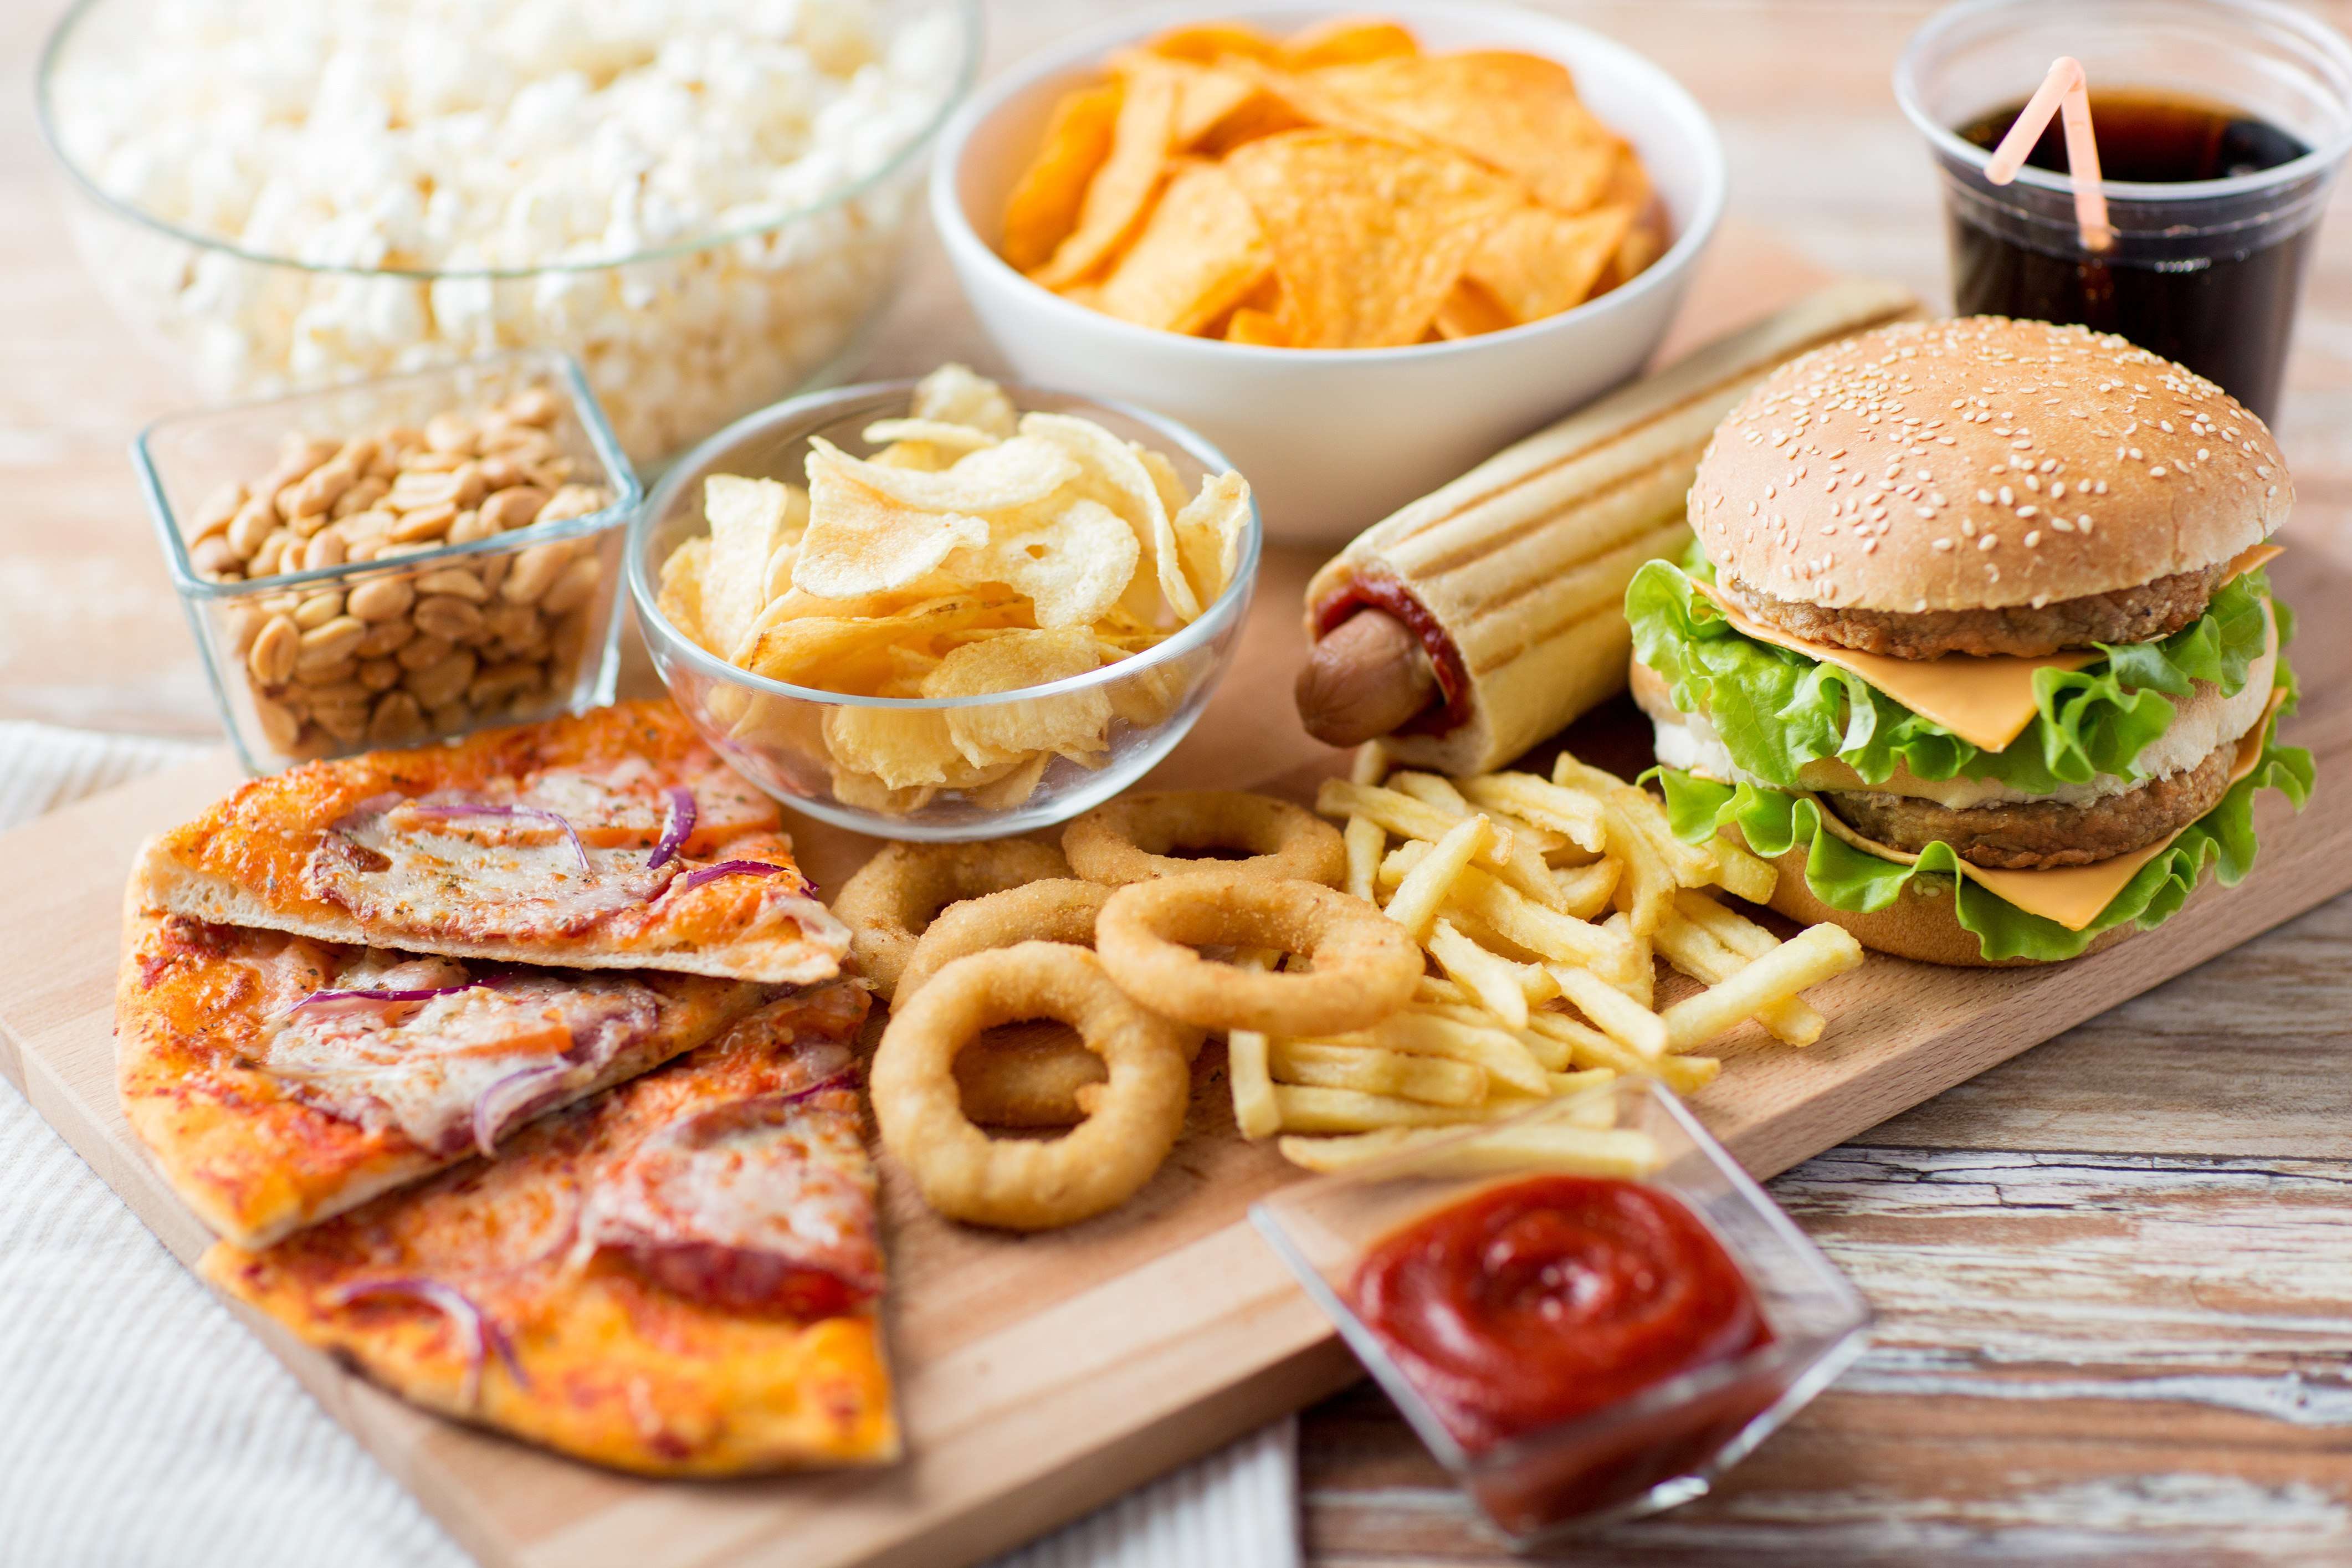 Ultra-Processed Foods - Linked To Increased Risk In Cancer